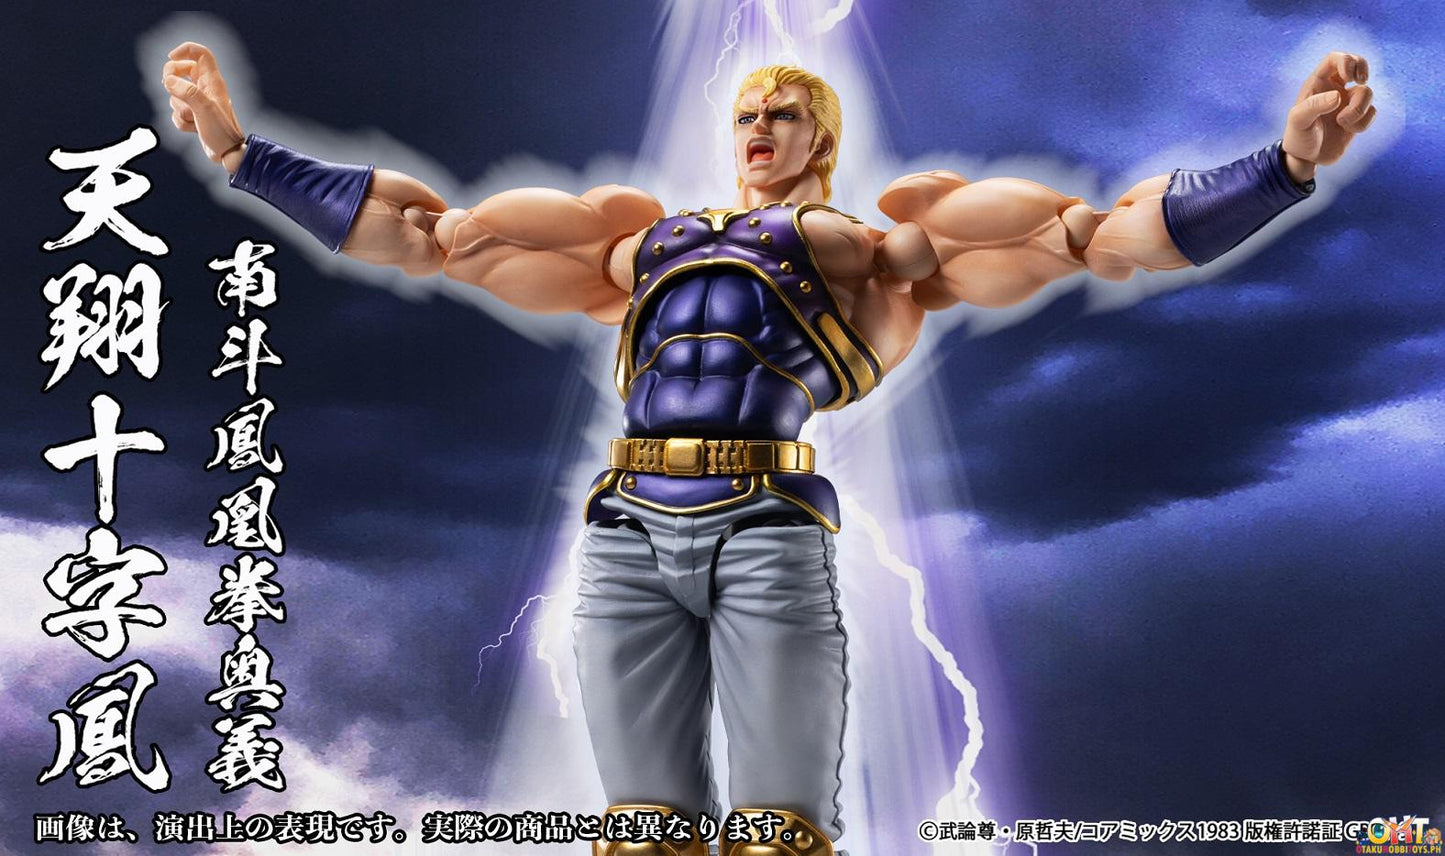 Medicos Super Action Statue Fist of the North Star THOUZER